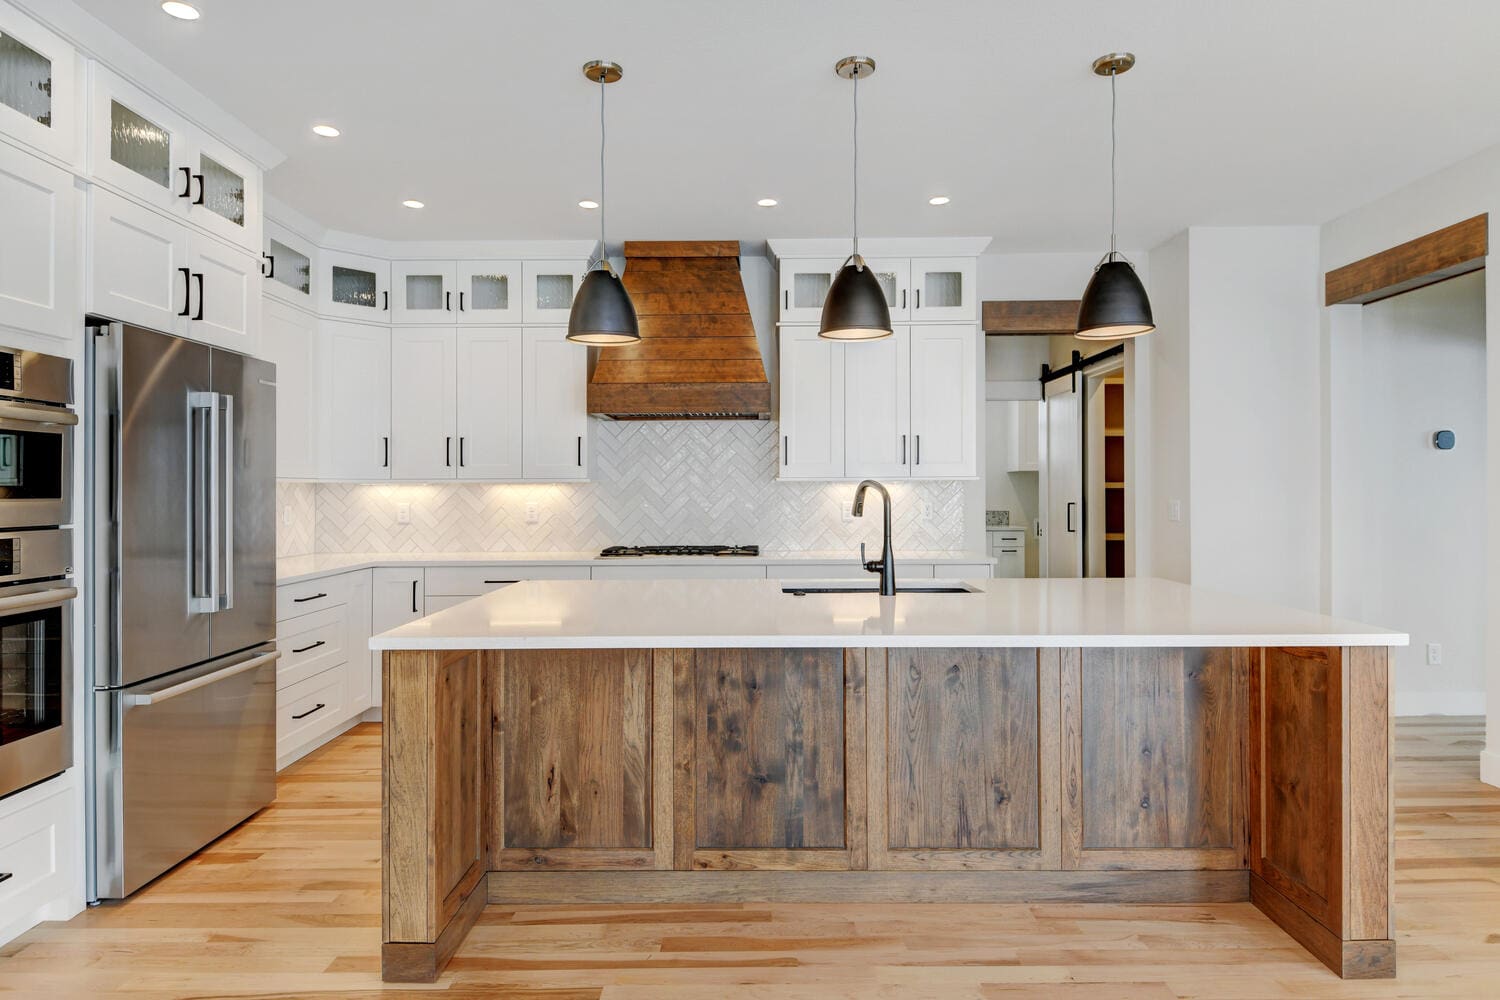 a spacious kitchen with white cupboards and counters, an island, and modern appliances